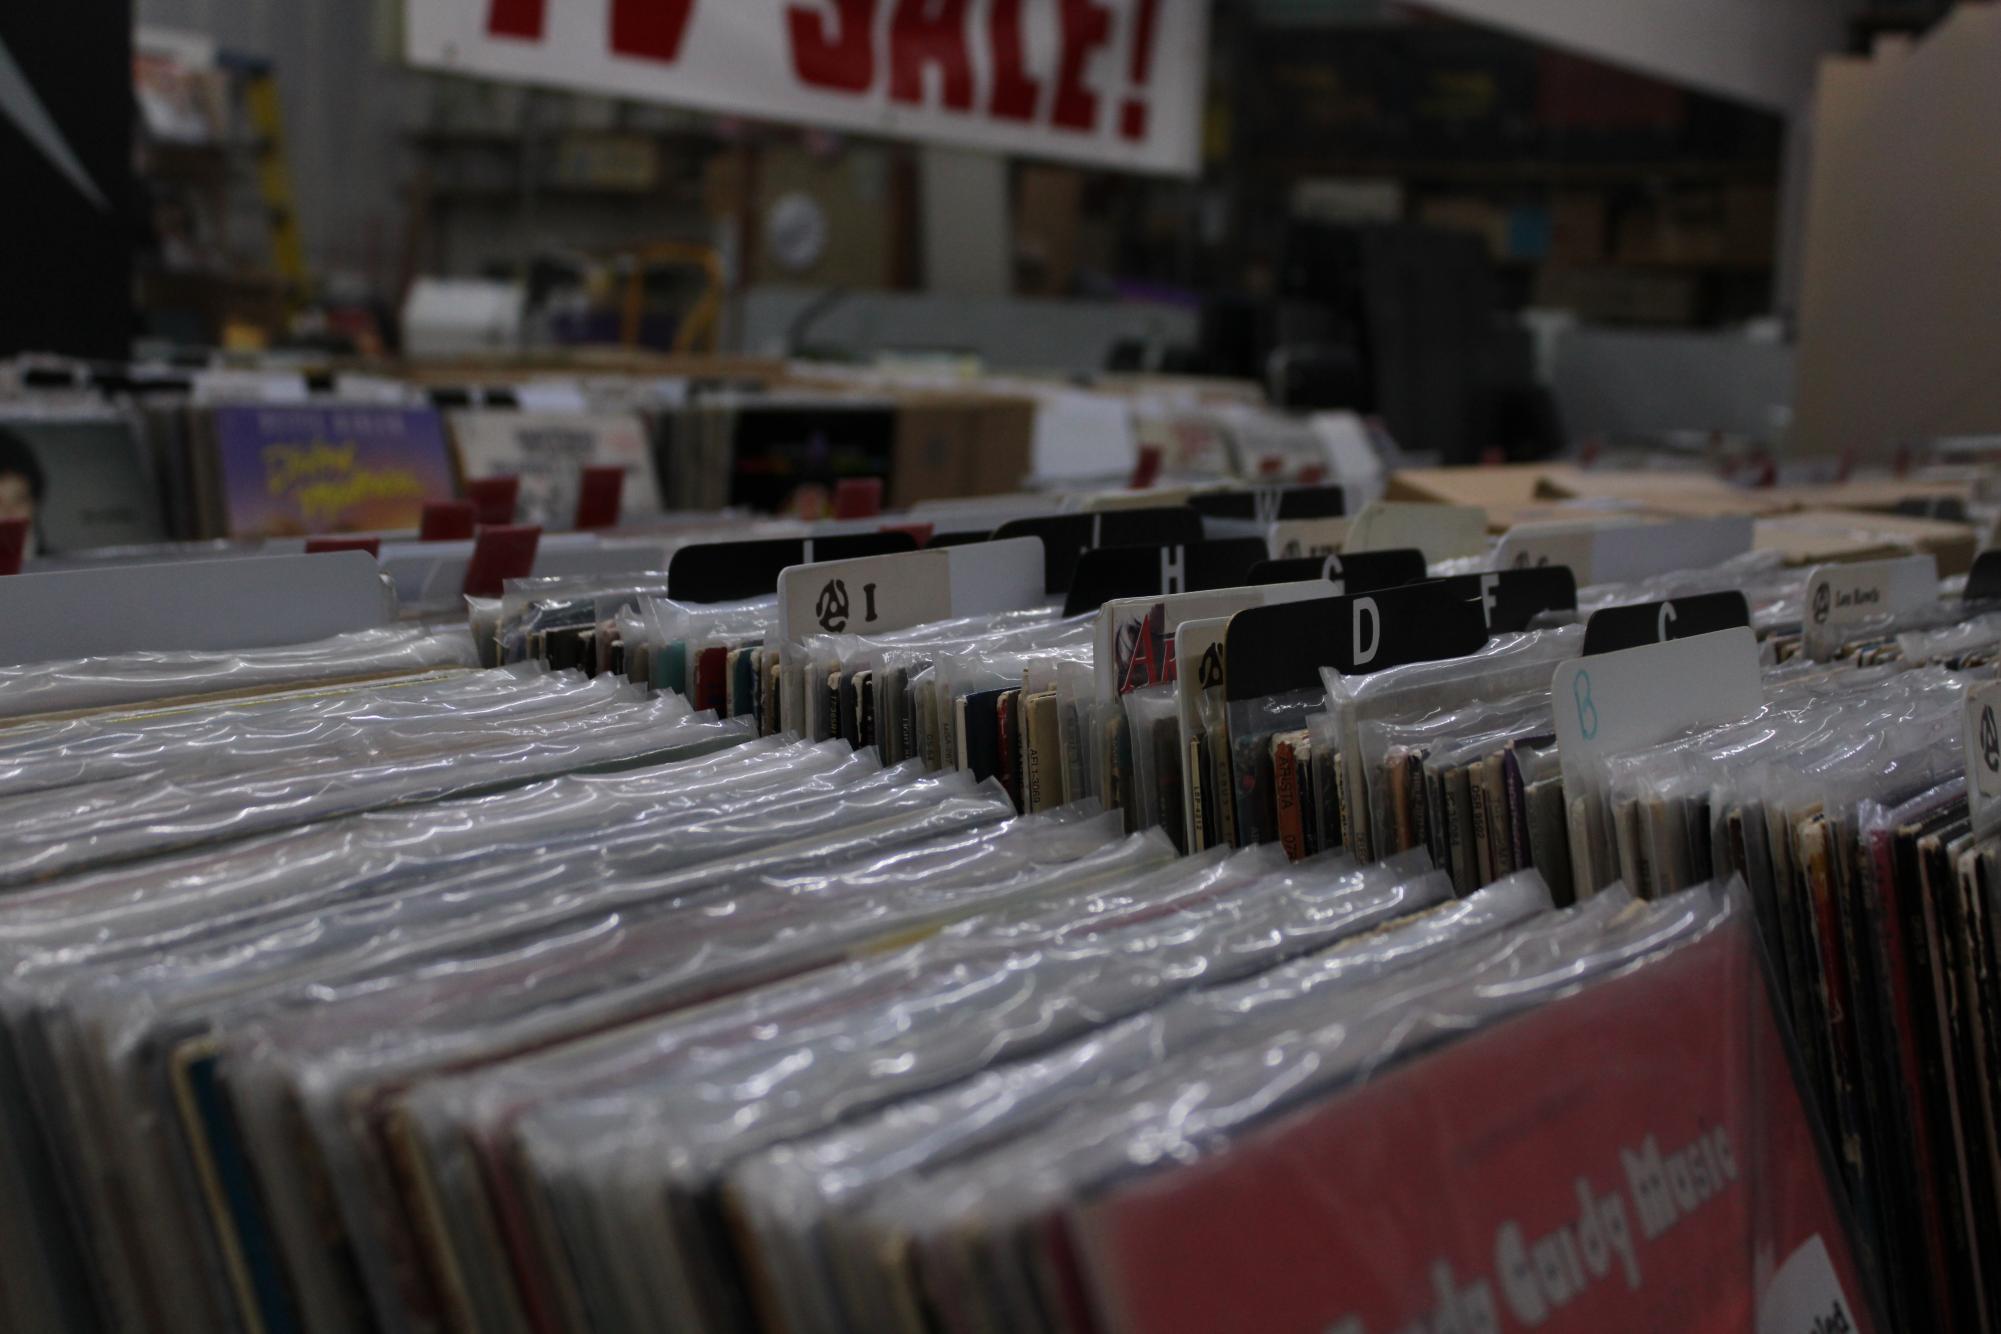 The vast collection of records at Record Krate in Wake Forest. Each meticulously wrapped and sorted in alphabetical order, the huge selection allows for anyone to find something theyd enjoy.